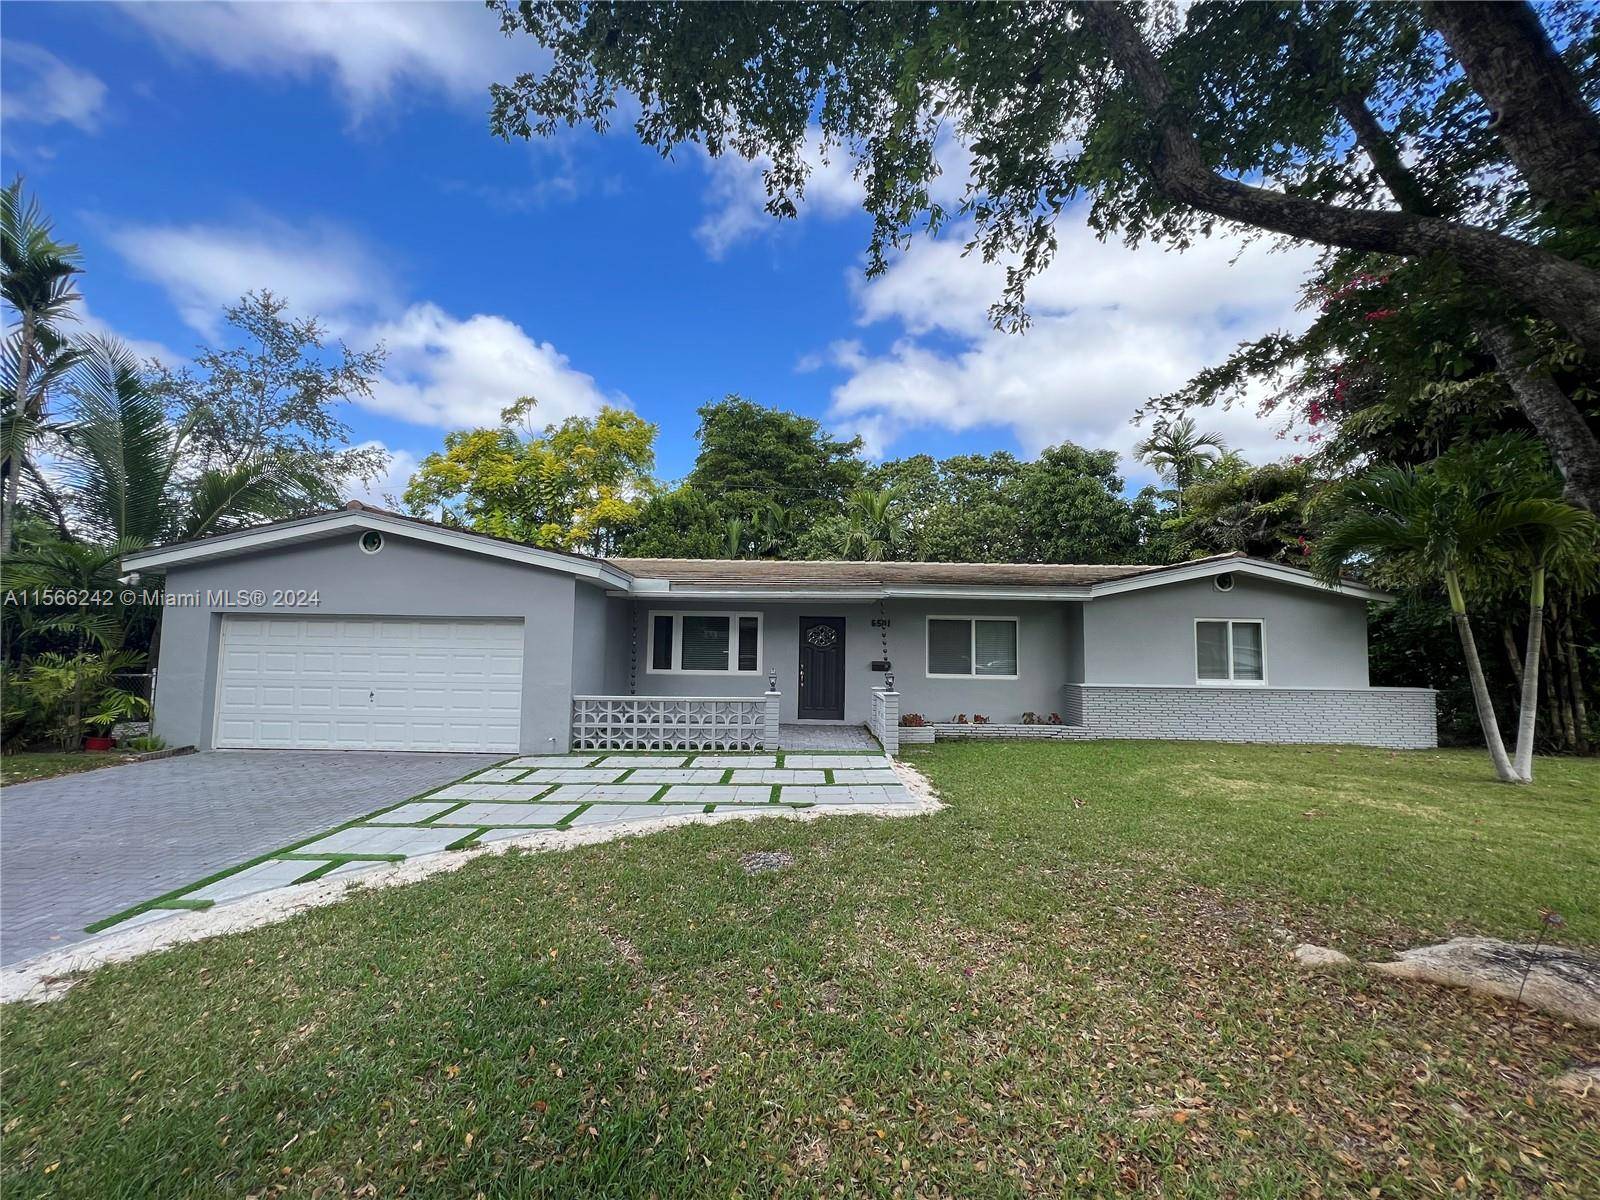 Spacious 3 bed 2 bath ranch home on a corner lot in South Miami.